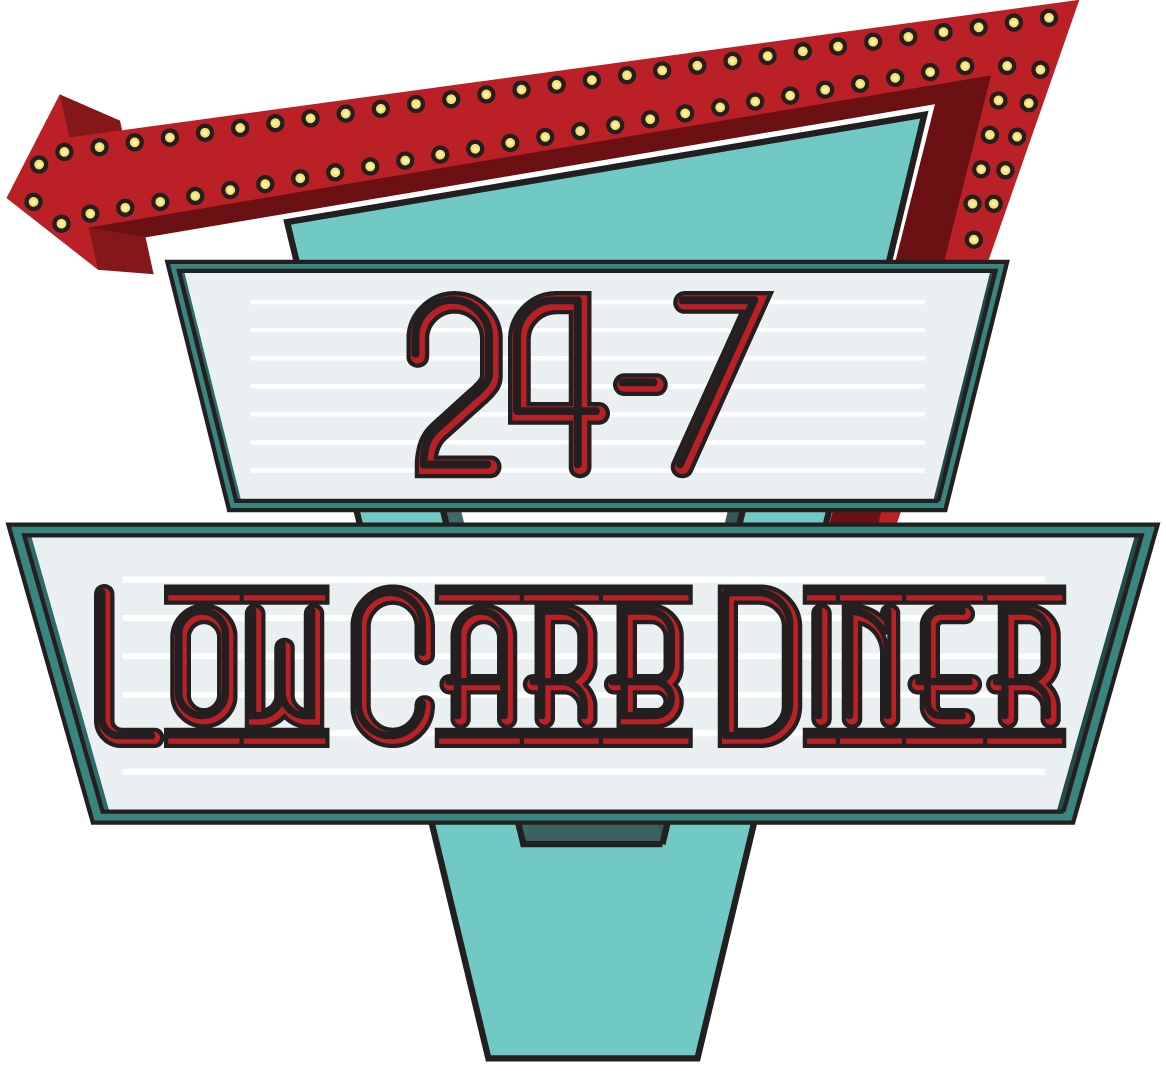 Free Diner Logo Cliparts, Download Free Clip Art, Free Clip Art on.